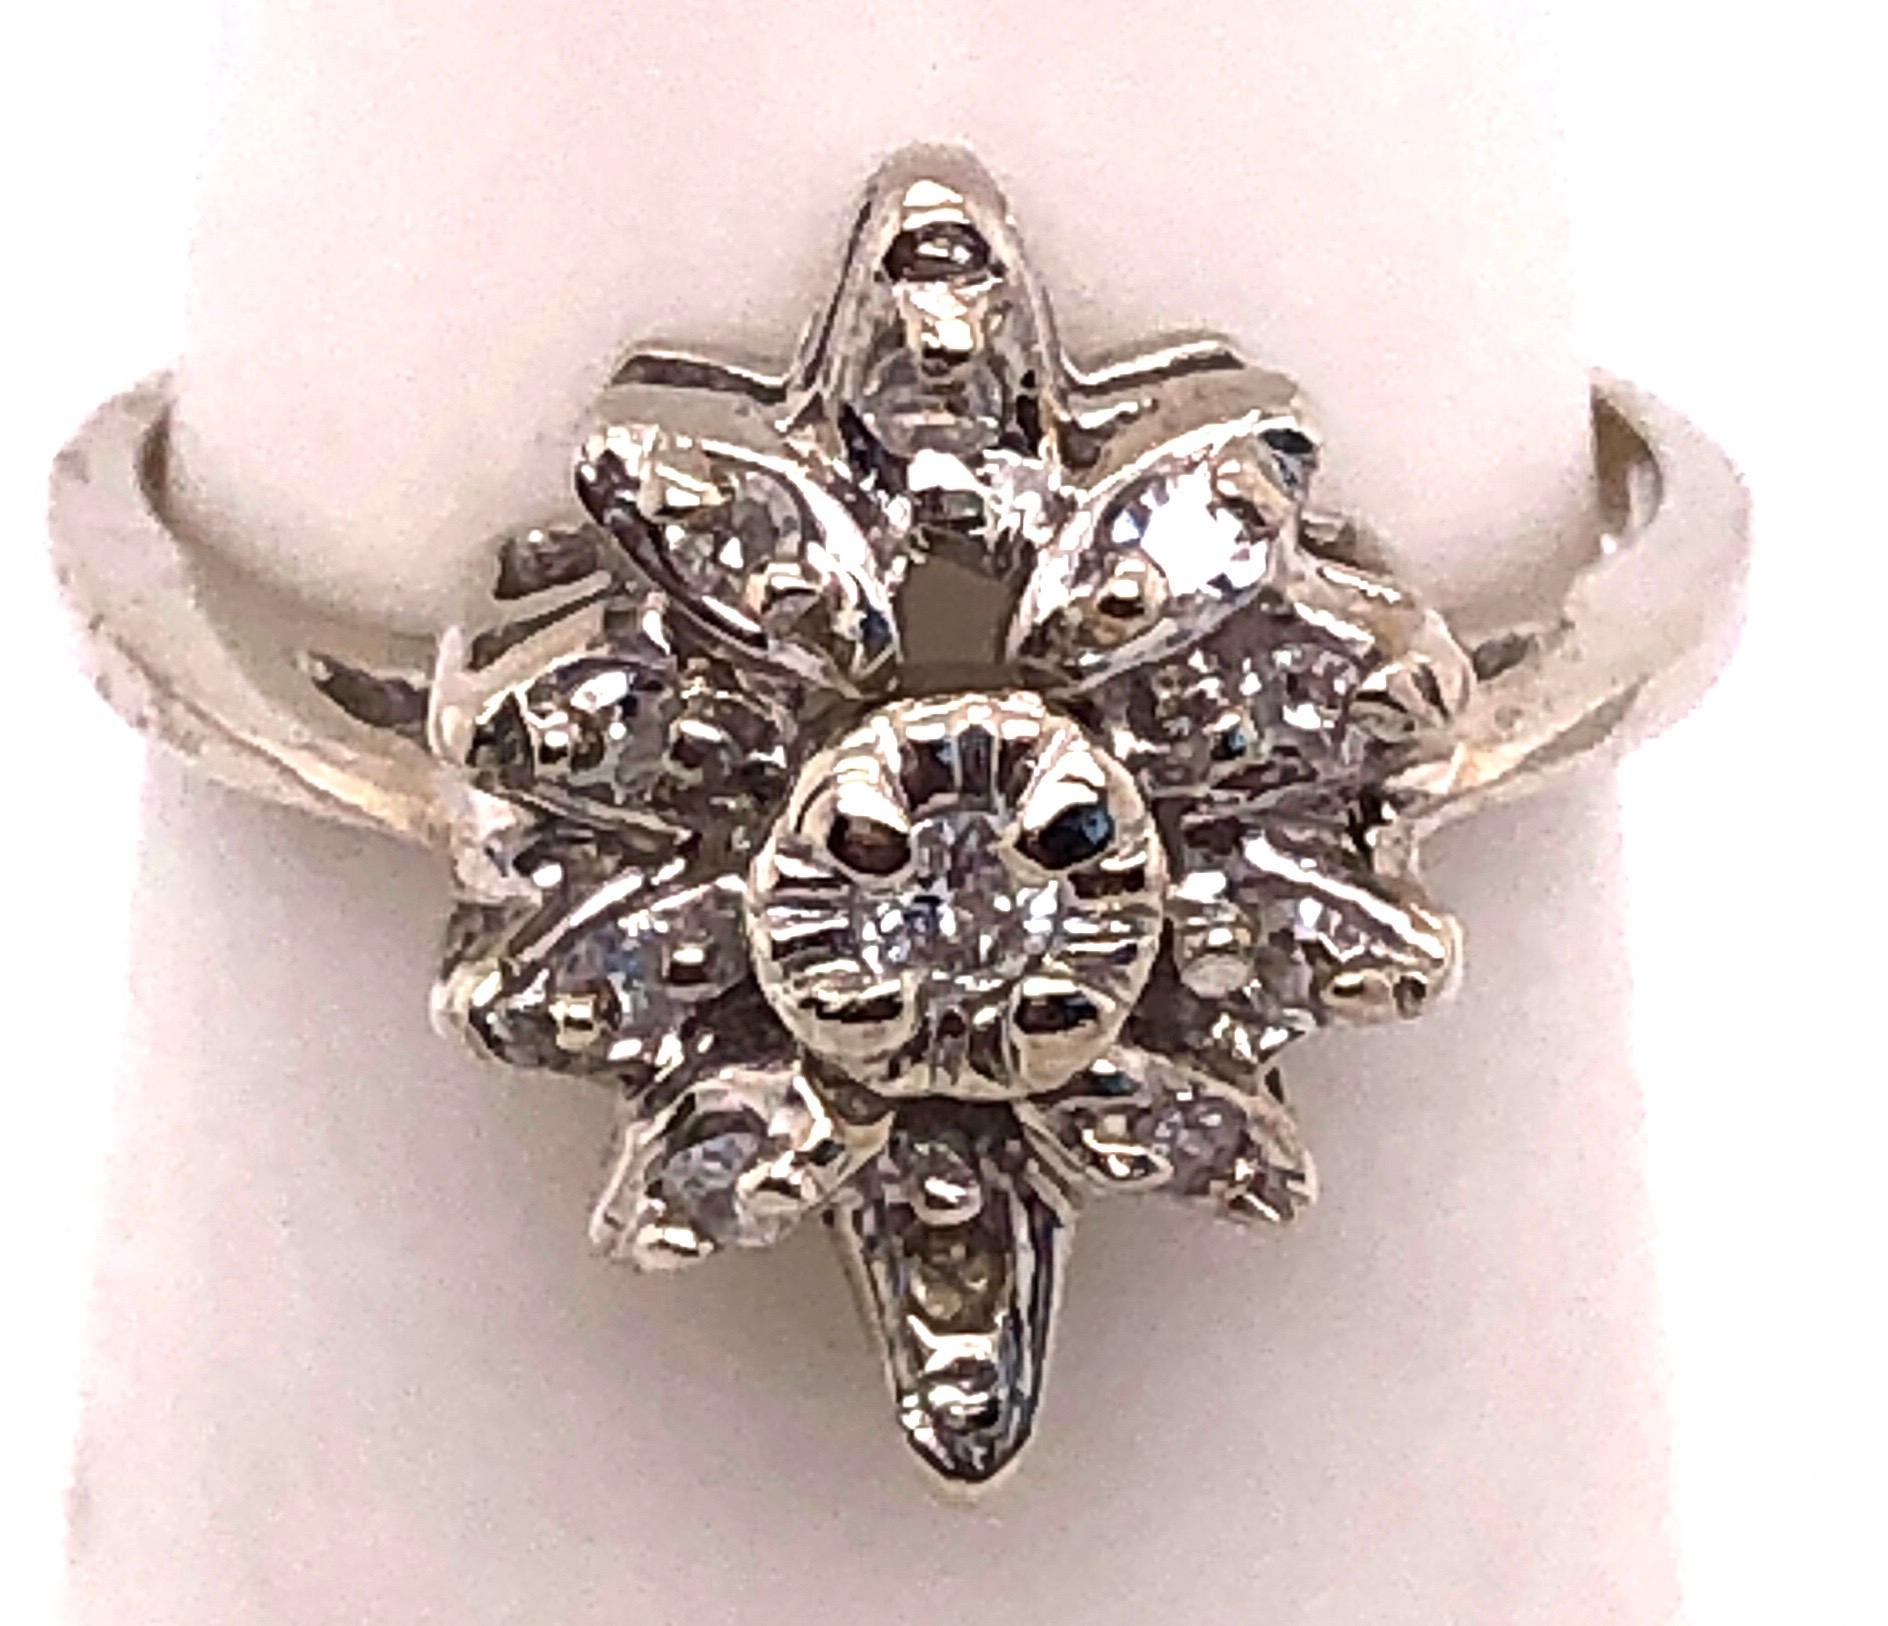 14 Karat White Gold Contemporary Ring Diamond Floral Design 0.33 TDW In Good Condition For Sale In Stamford, CT